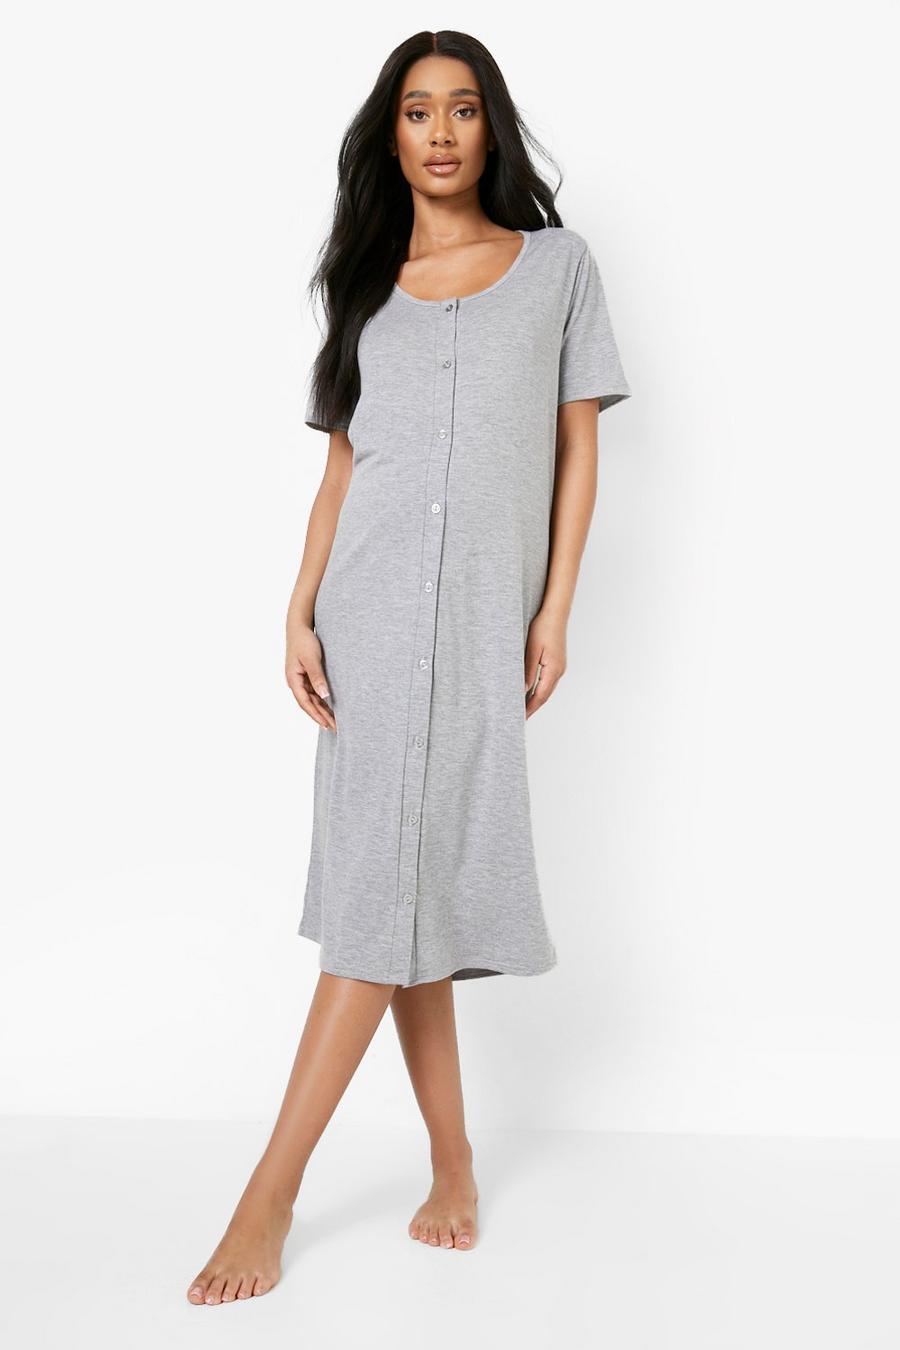 Grey marl Maternity Midi Button Front Nightgown